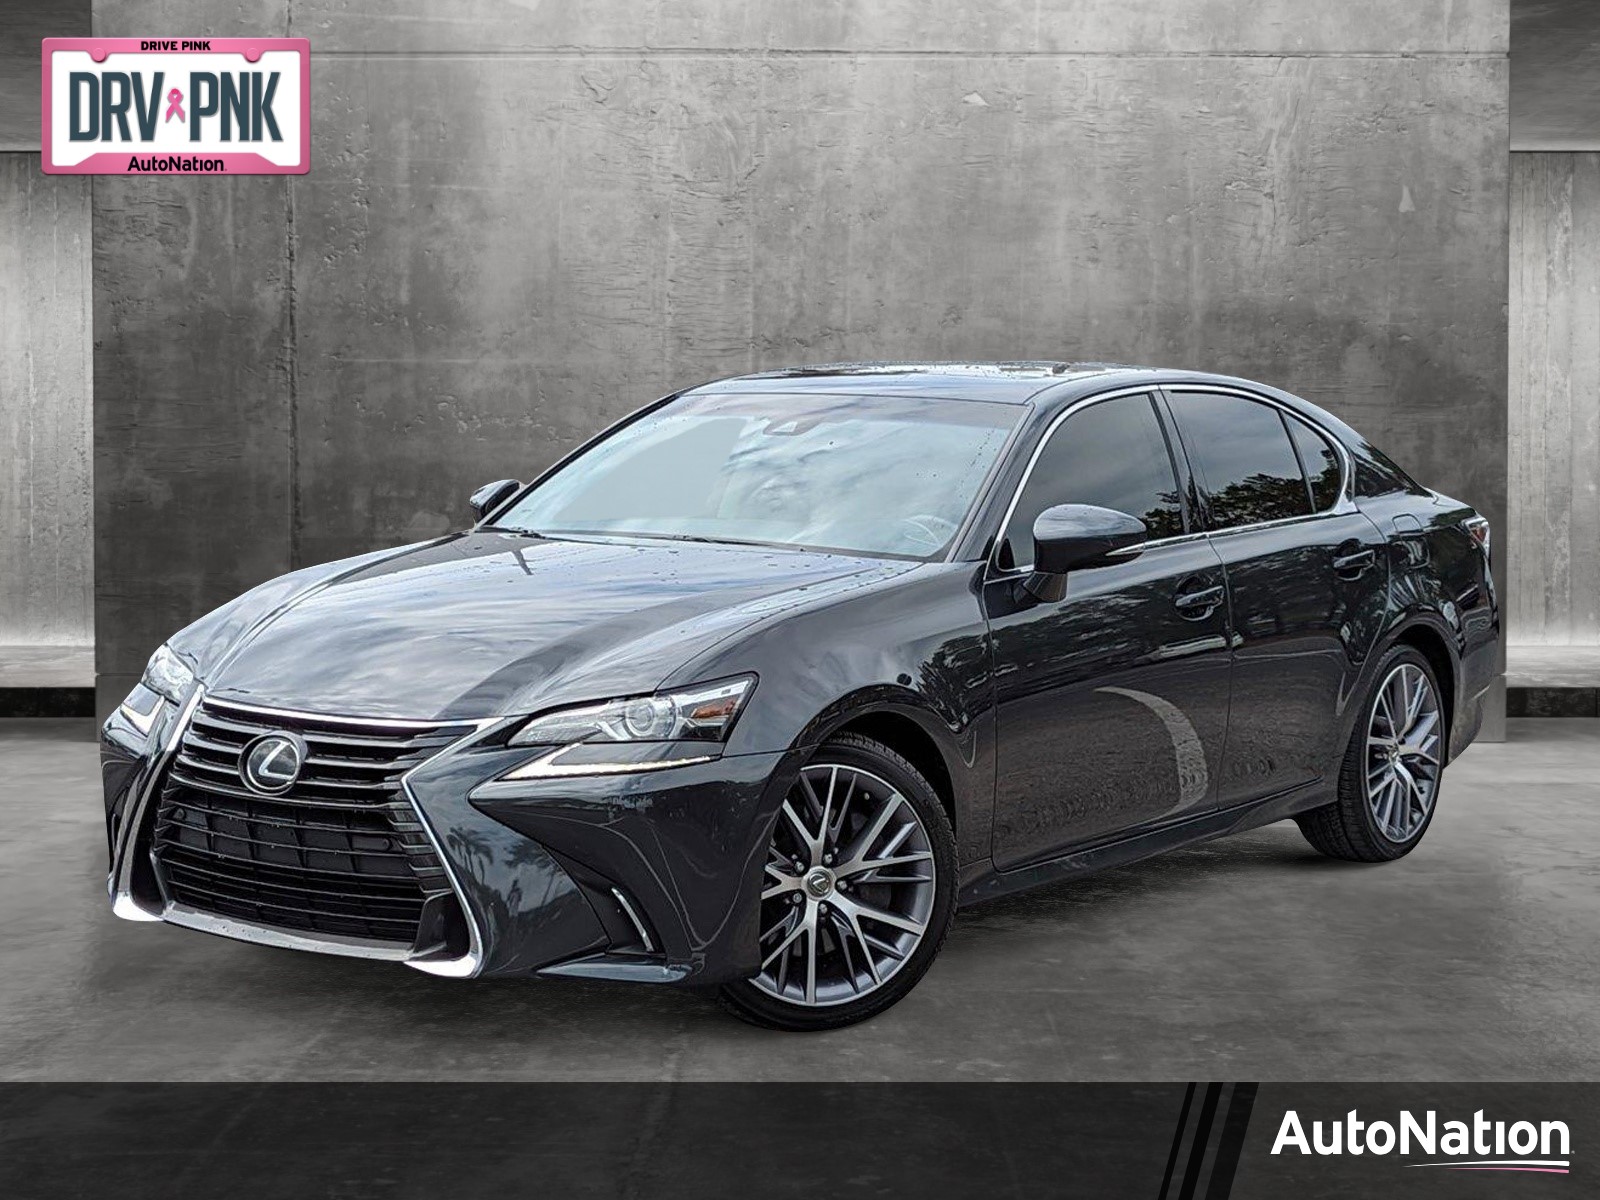 Pre-Owned 2018 Lexus GS 350 GS 350 4dr Car in Clearwater #JA014668 | Lexus  of Clearwater